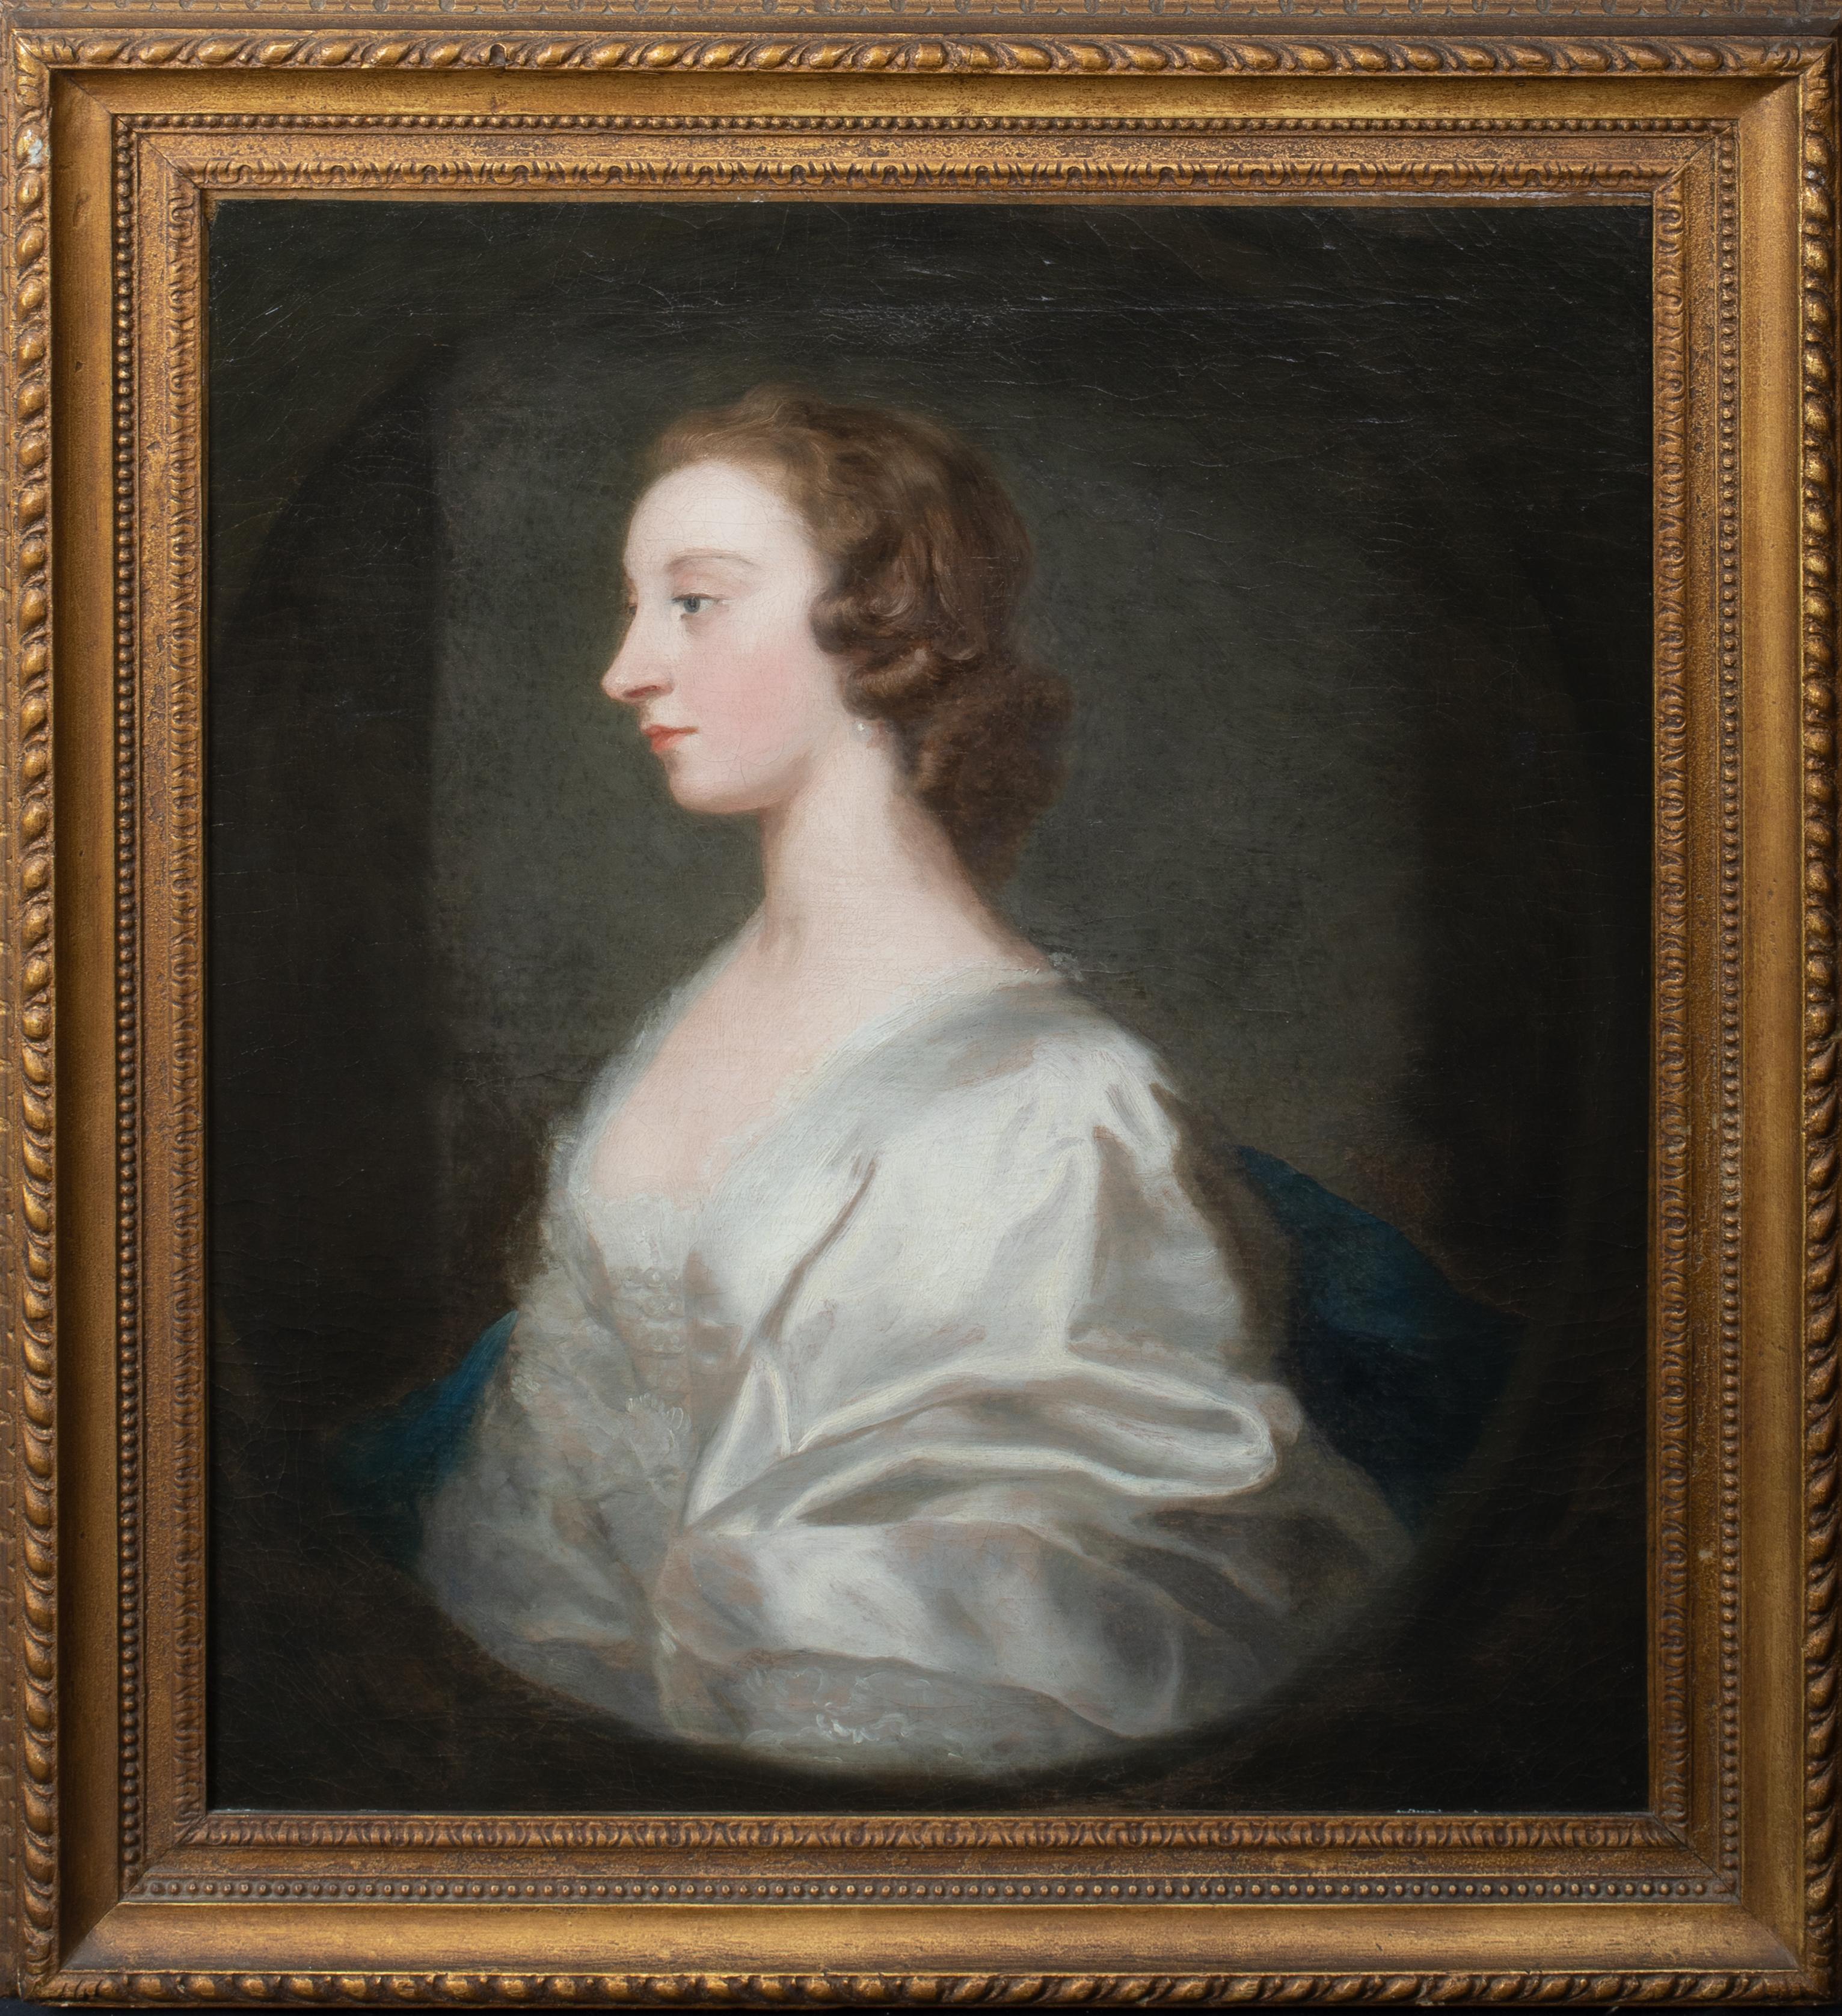 Portrait Of A Lady, Believed to be Miss Craigie, 18th Century  - Painting by Studio of Sir Allan Ramsay